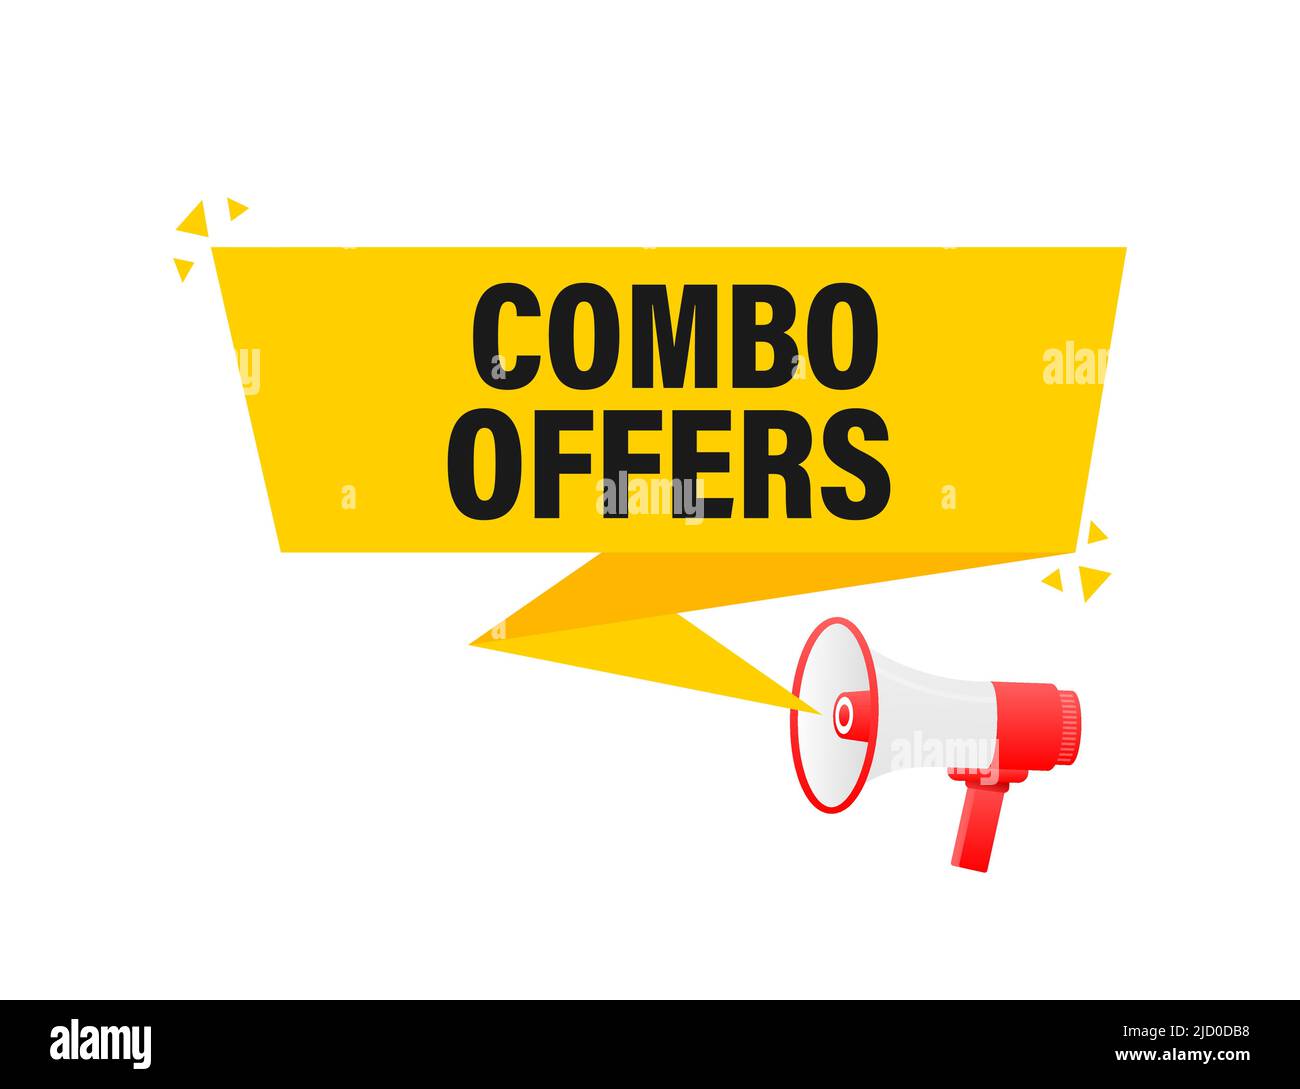 Combo offers megaphone banner in 3D style on white background